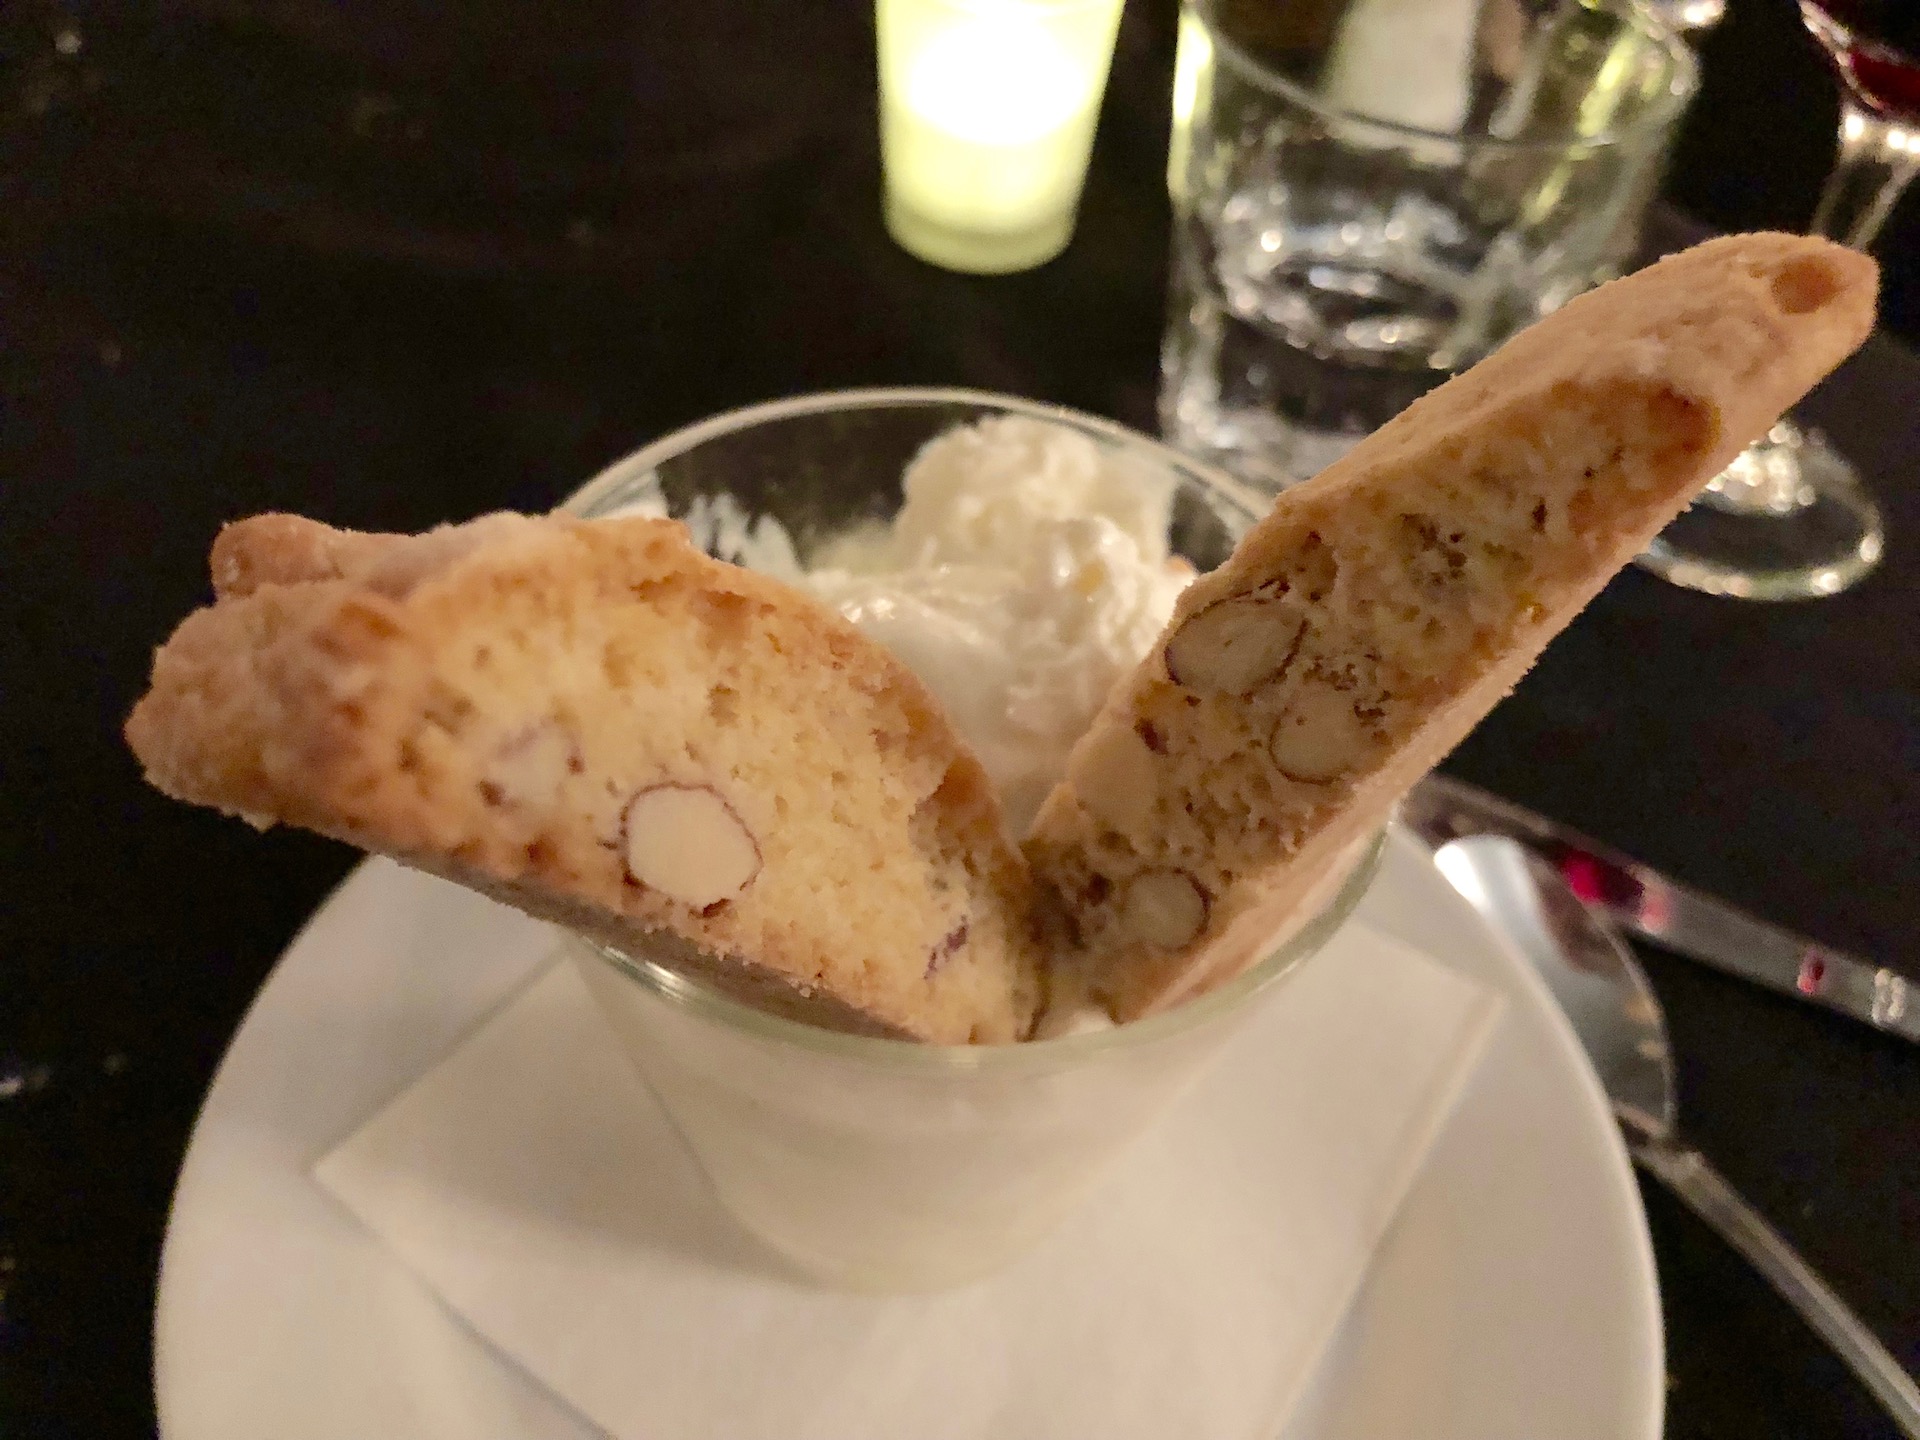 The biscotti at Bertolucci’s is a must-order and far softer in texture than most biscotti.